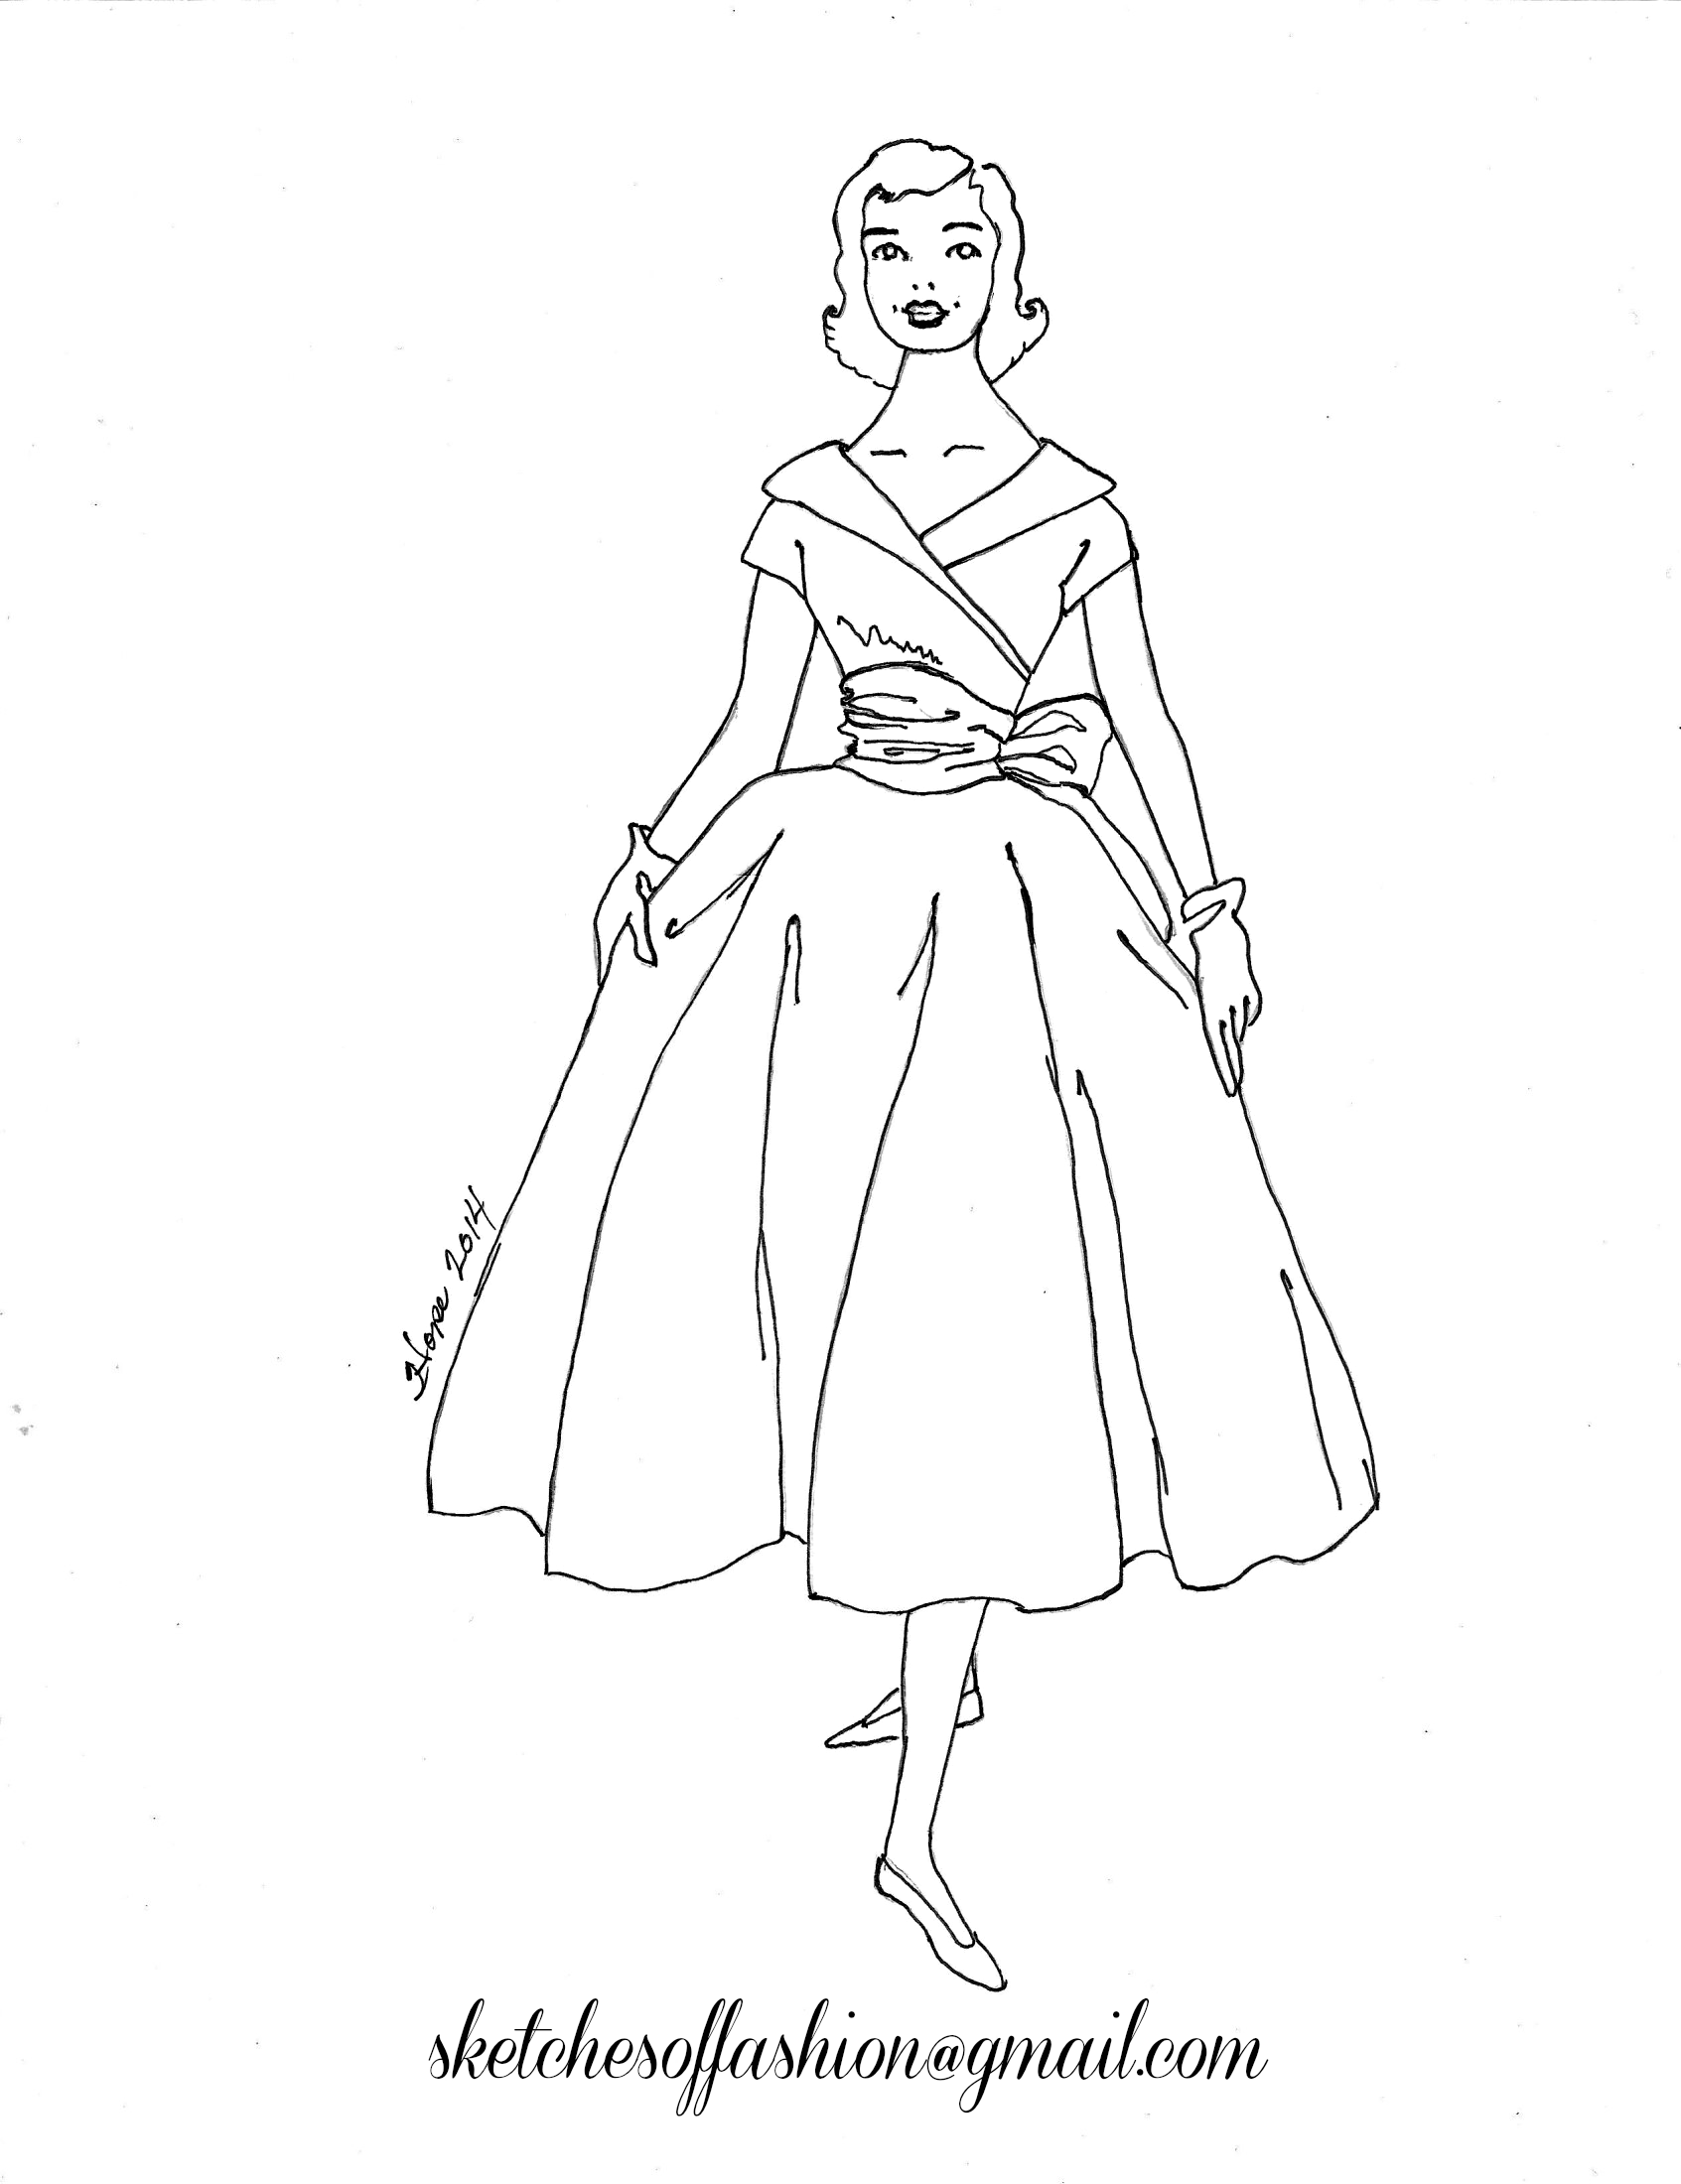 costume-design-template-coloring-pages